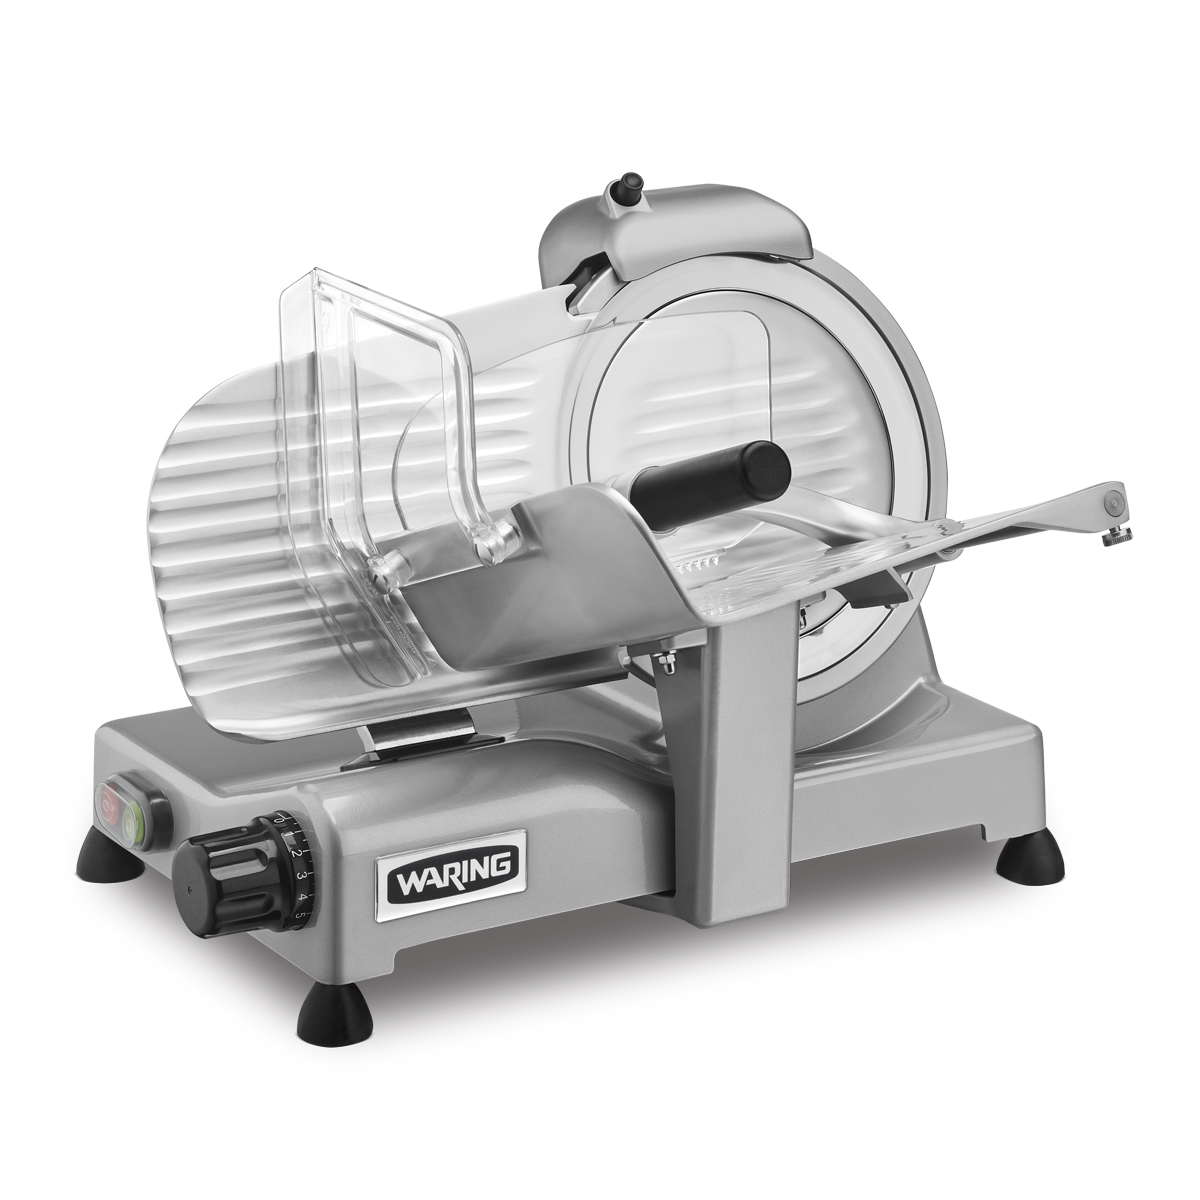 https://www.waringcommercialproducts.com/files/products/wcs220sv-professional-food-slicer-main-image-1200x1200.jpg